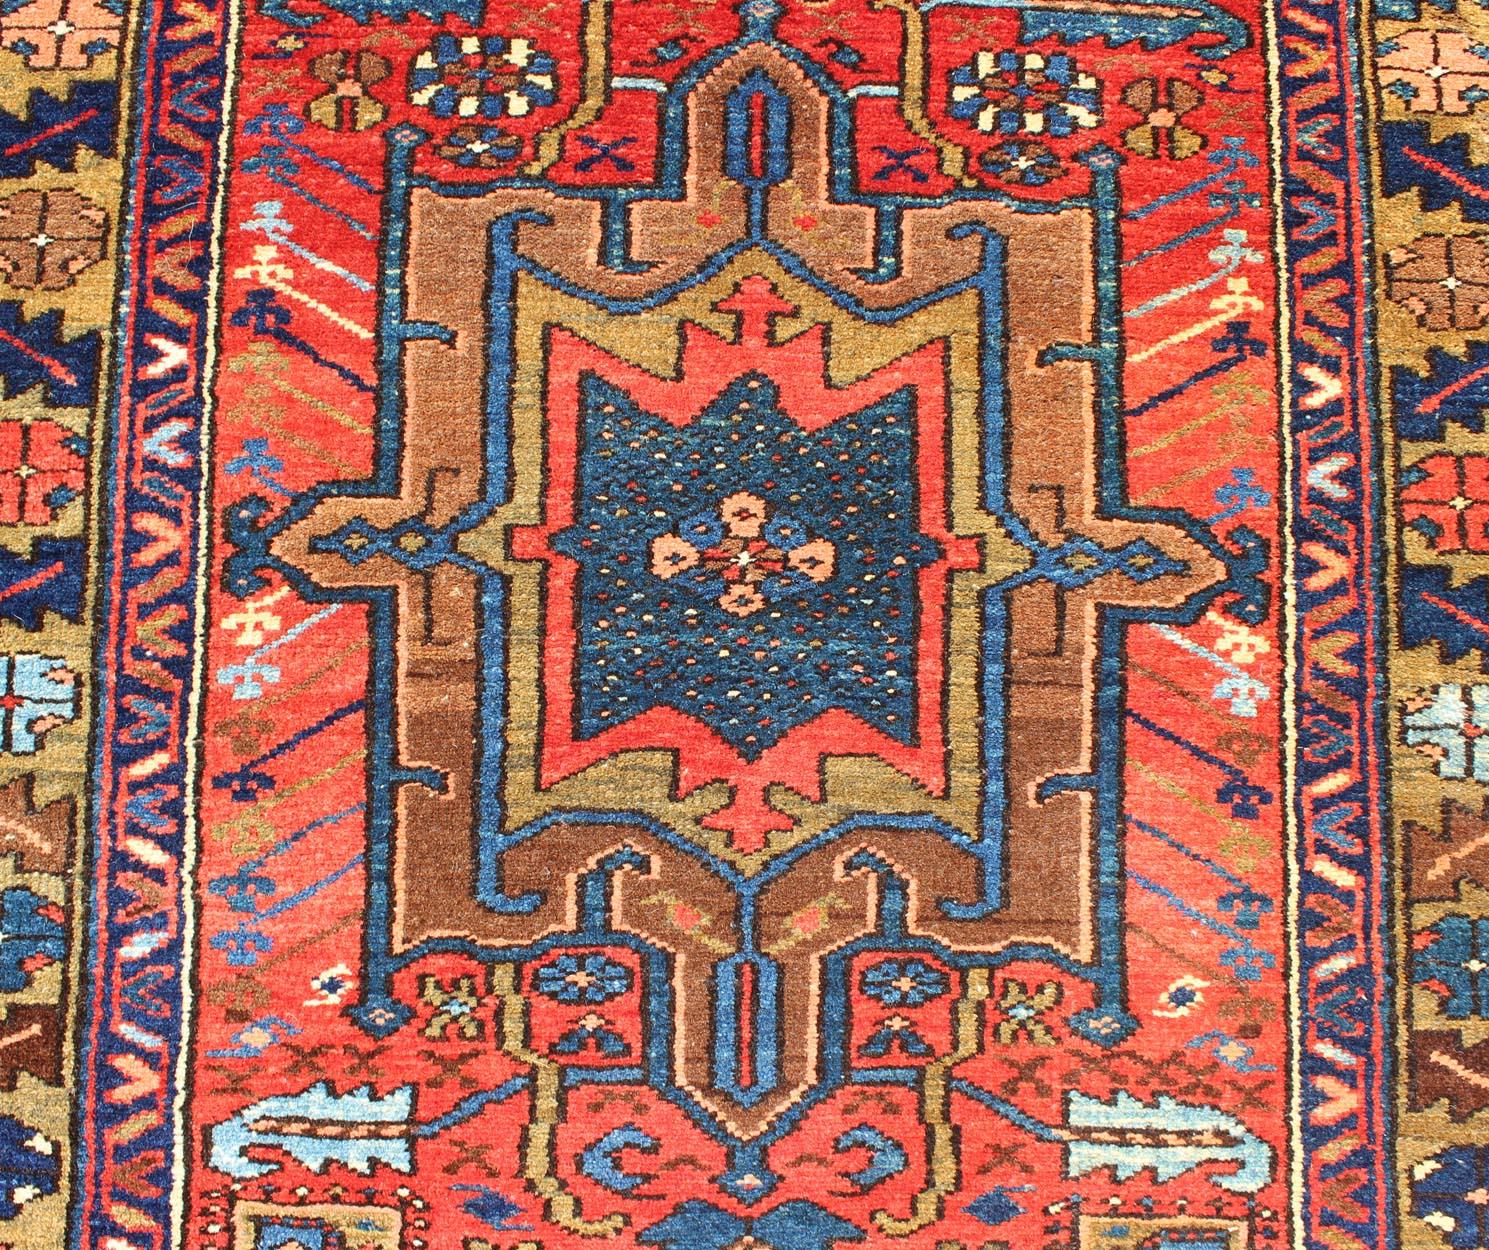 Antique Persian Karadjeh Runner with Layered Geometric Medallions in Red-Orange In Excellent Condition For Sale In Atlanta, GA